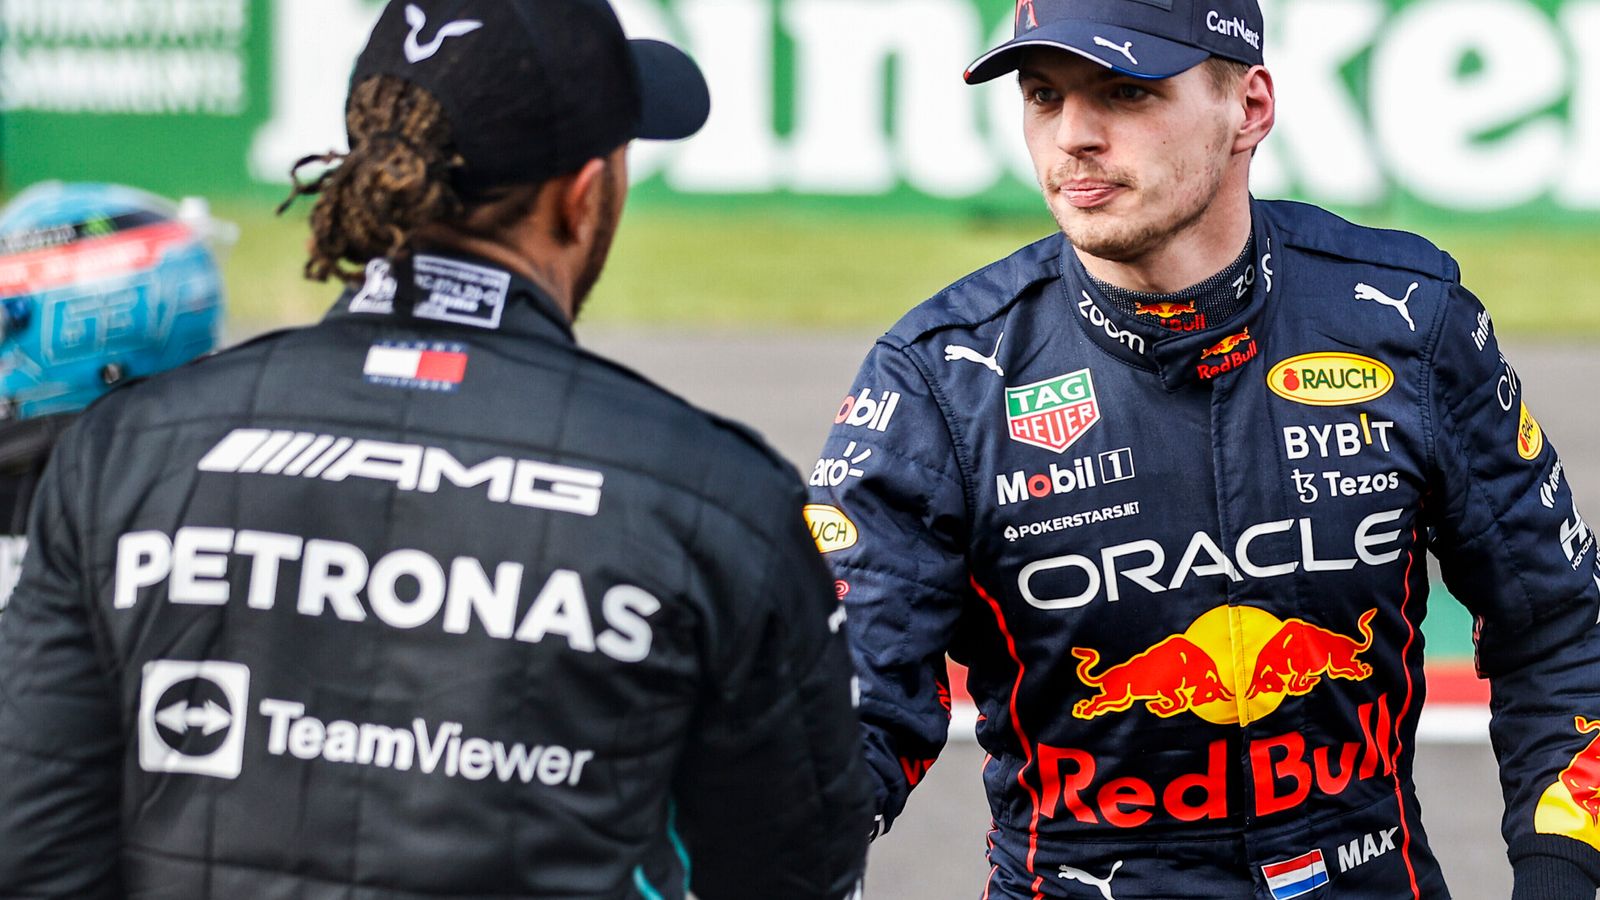 martin-brundle-max-verstappen-reaches-new-level-of-f1-dominance-as-red-bull-oust-mercedes-in-mexico